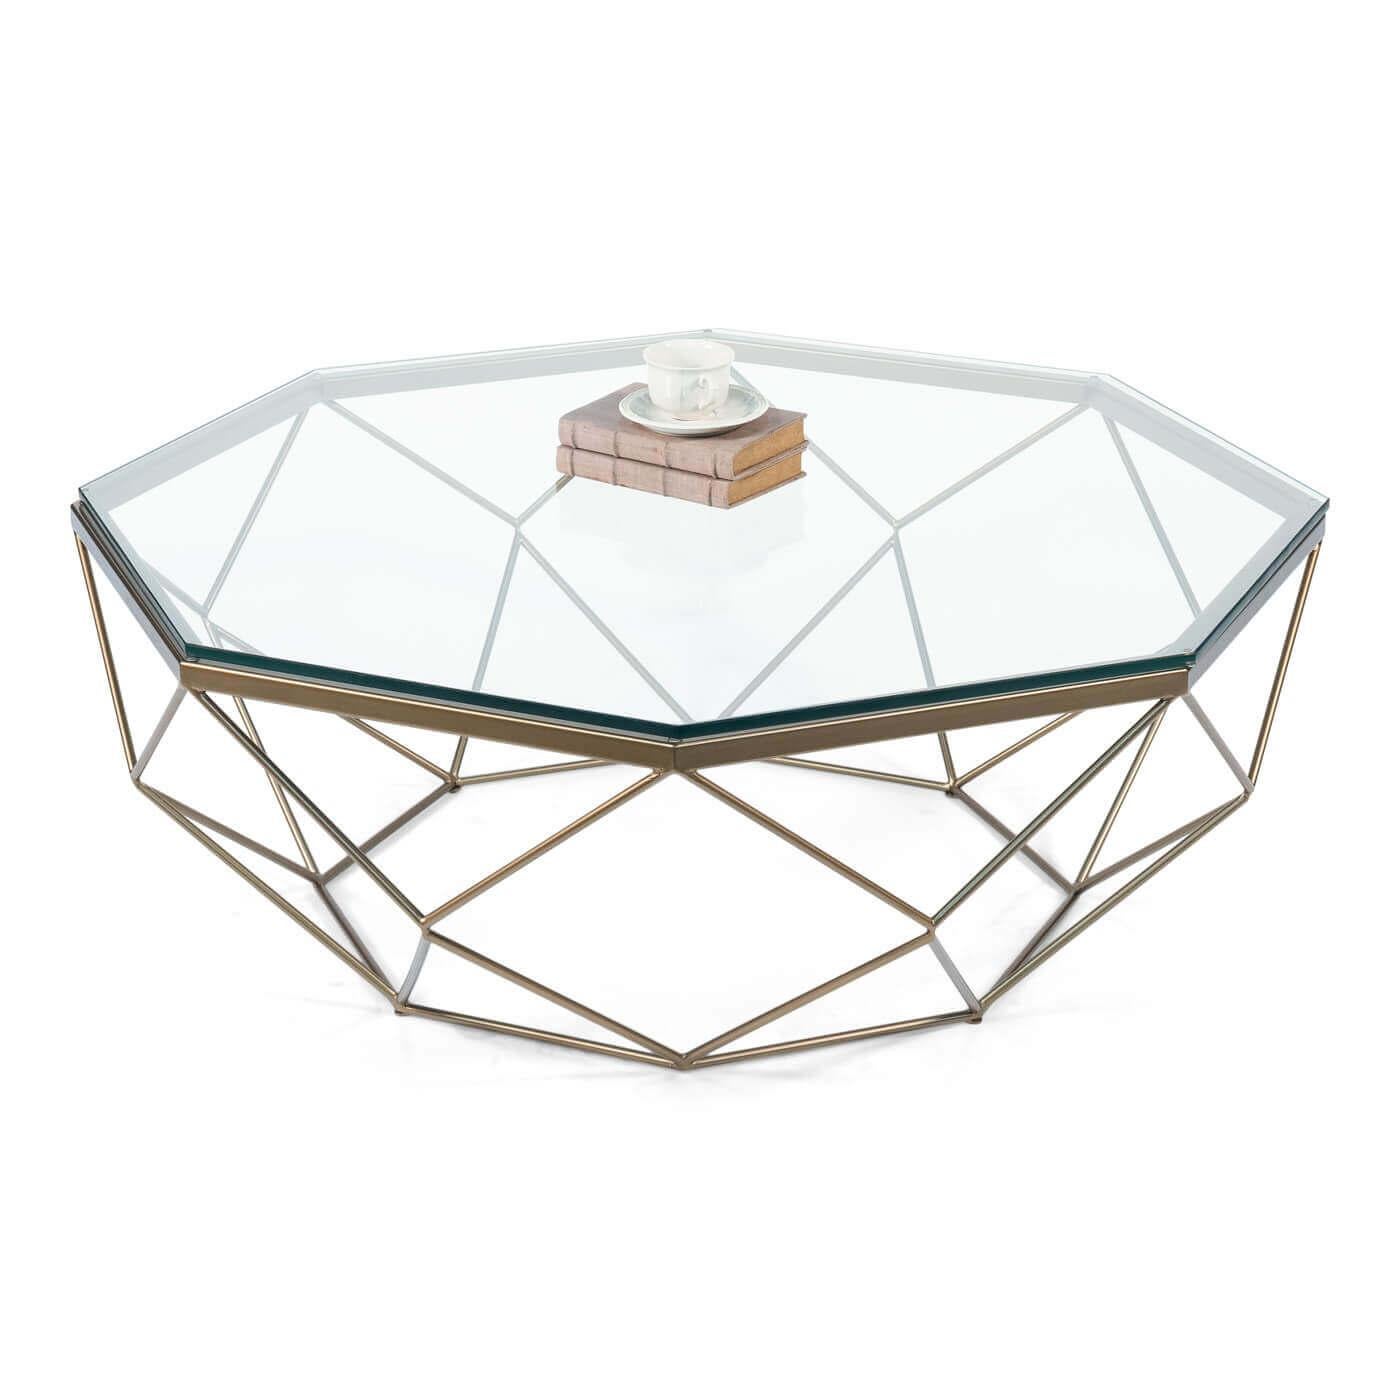 A modern brass octagonal coffee table. This geometric table has a sleek glass top. The octagon base features a design comprised of triangles and squares adding visual interest from all viewing angles. 

The table has a thick .5